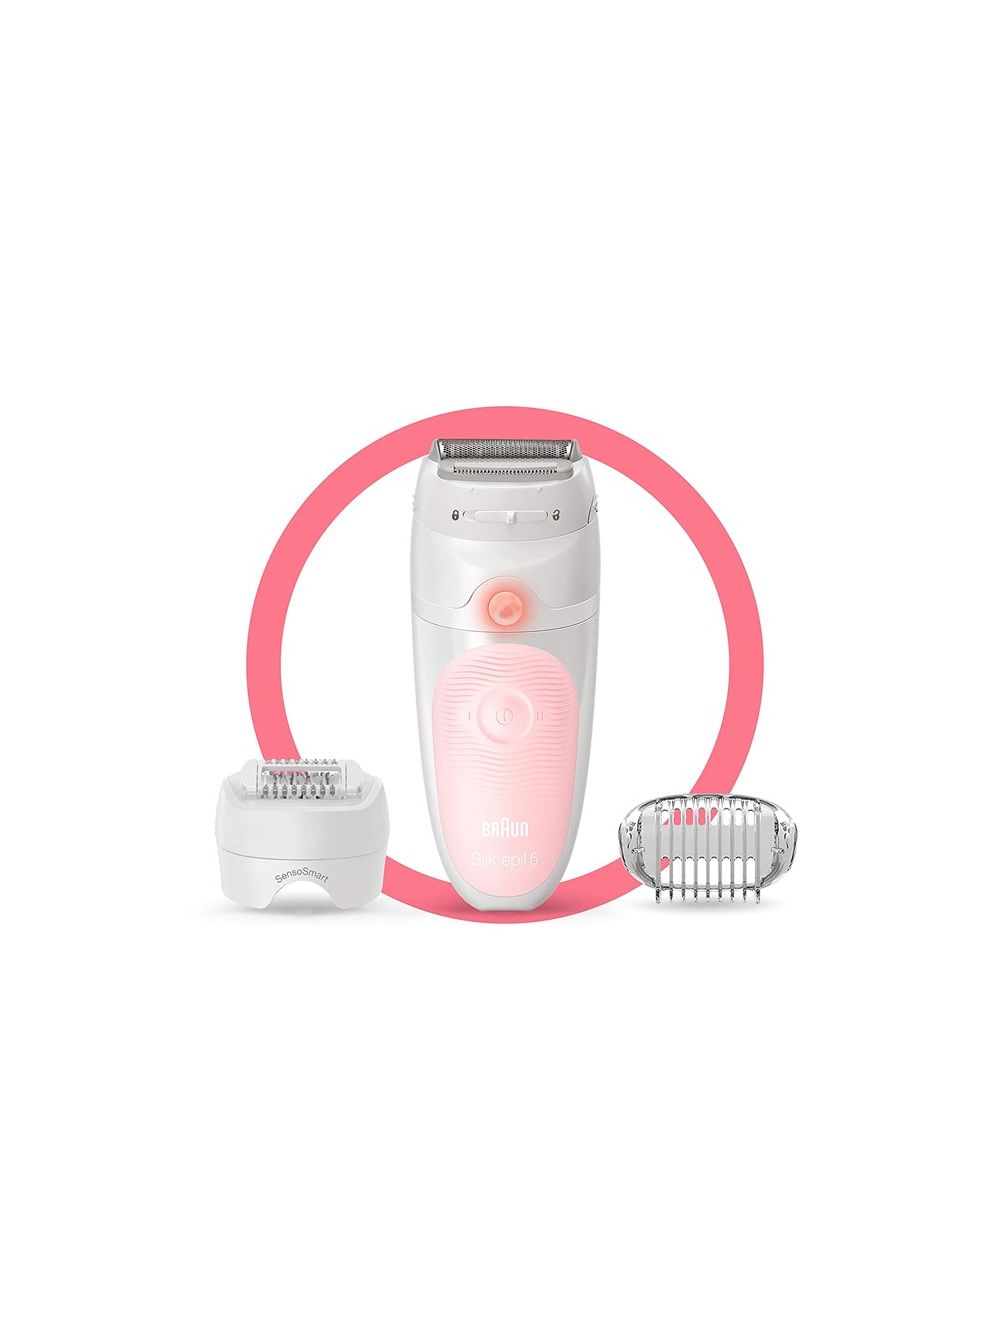 Braun Epilator for Women Silk-épil 5 5-620 for Hair Removal Wet & Dry  Womens Shaver & Trimmer Cordless Rechargeable -White*Pink